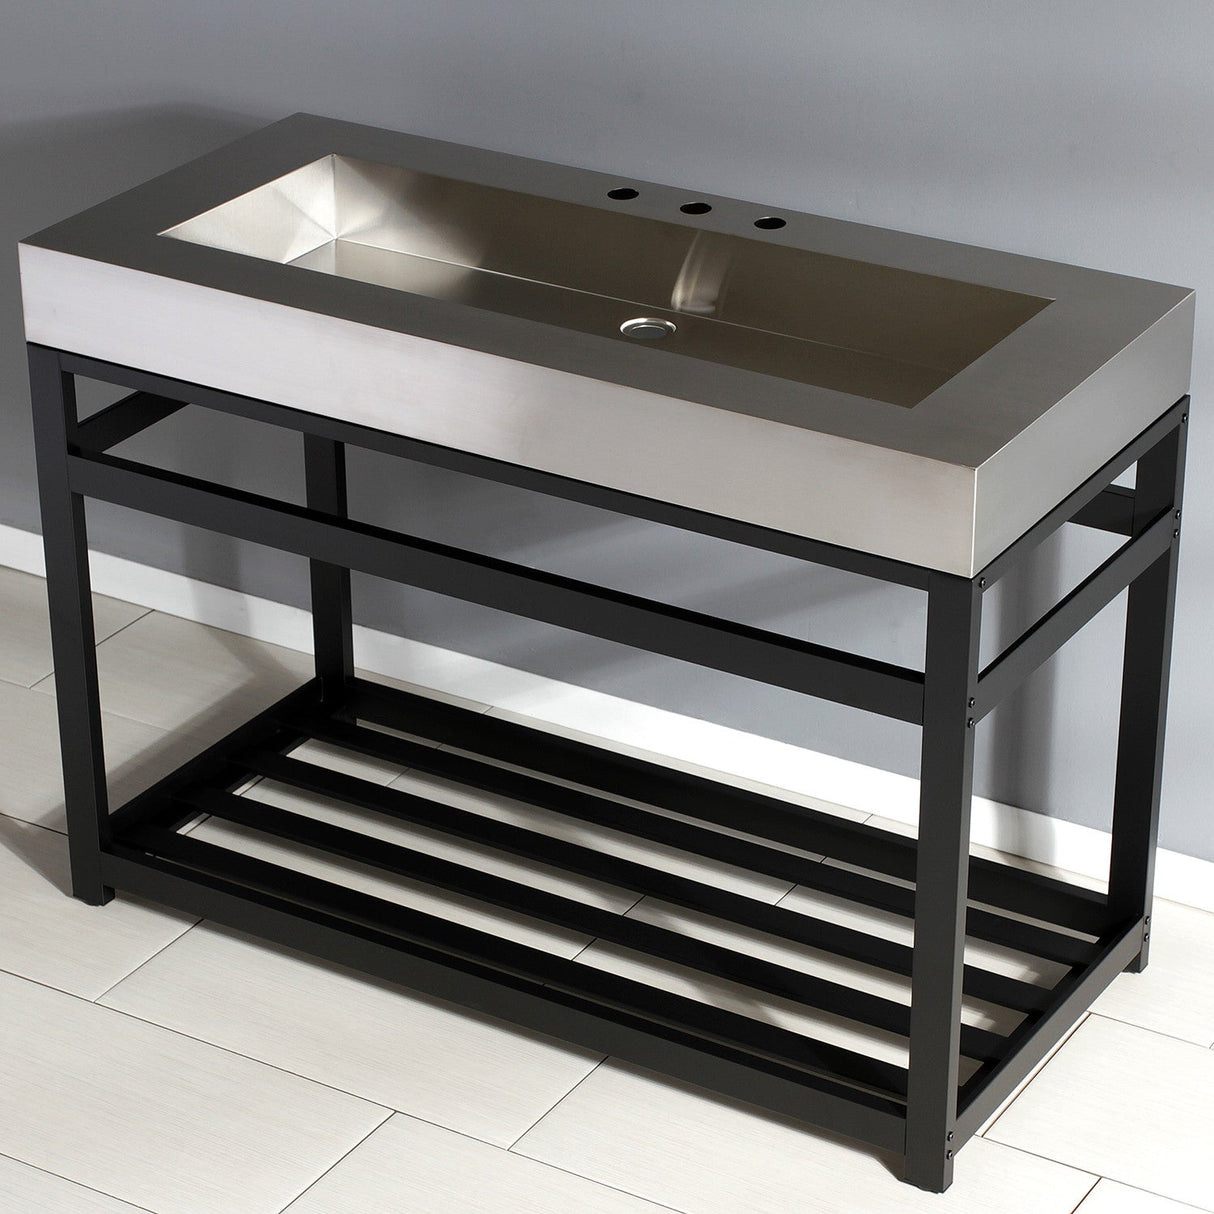 Kingston Commercial KVSP4922A0 Stainless Steel Console Sink, Brushed/Matte Black